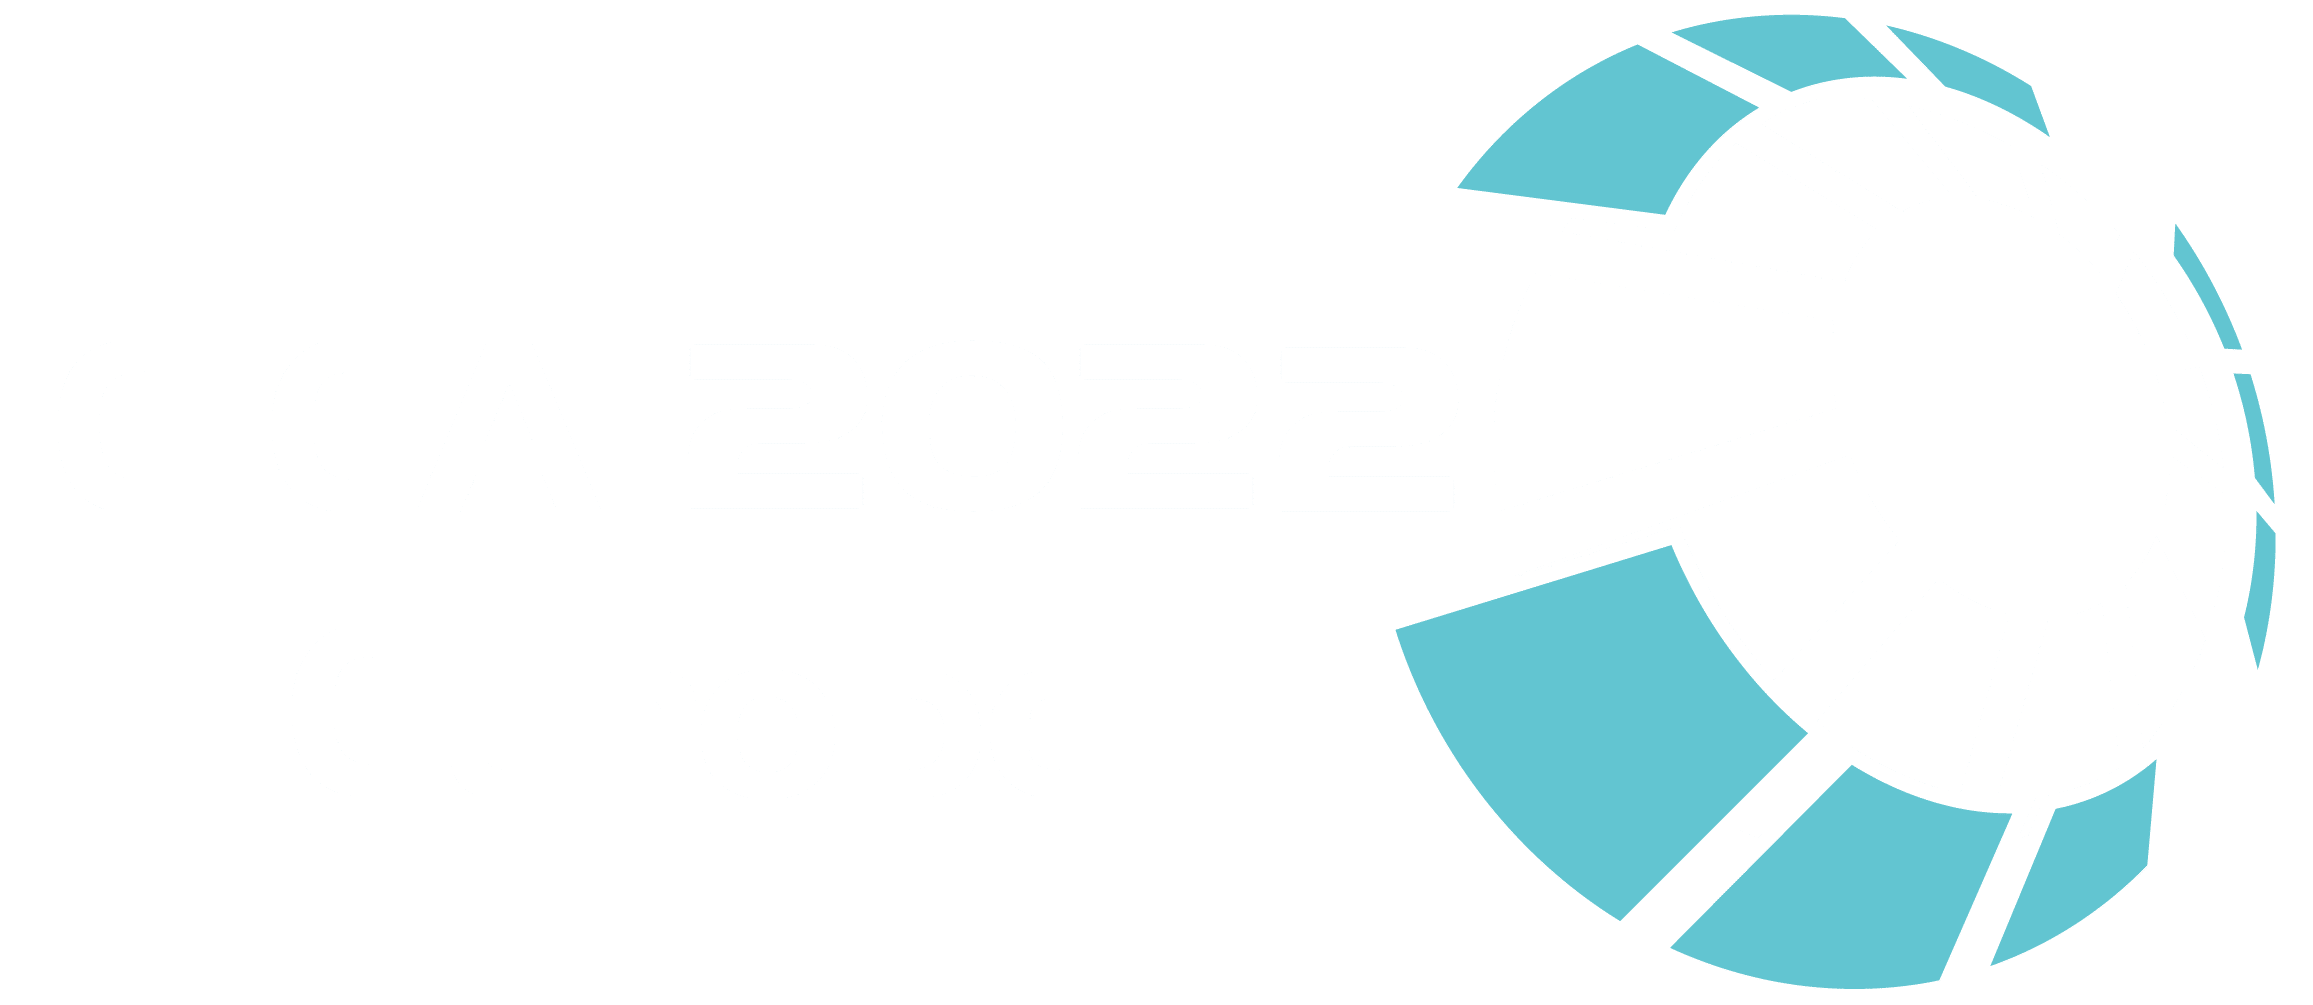 2022 The 9th International Conference on Industrial Engineering and Applications (ICIEA 2022-Europe)–SCIE